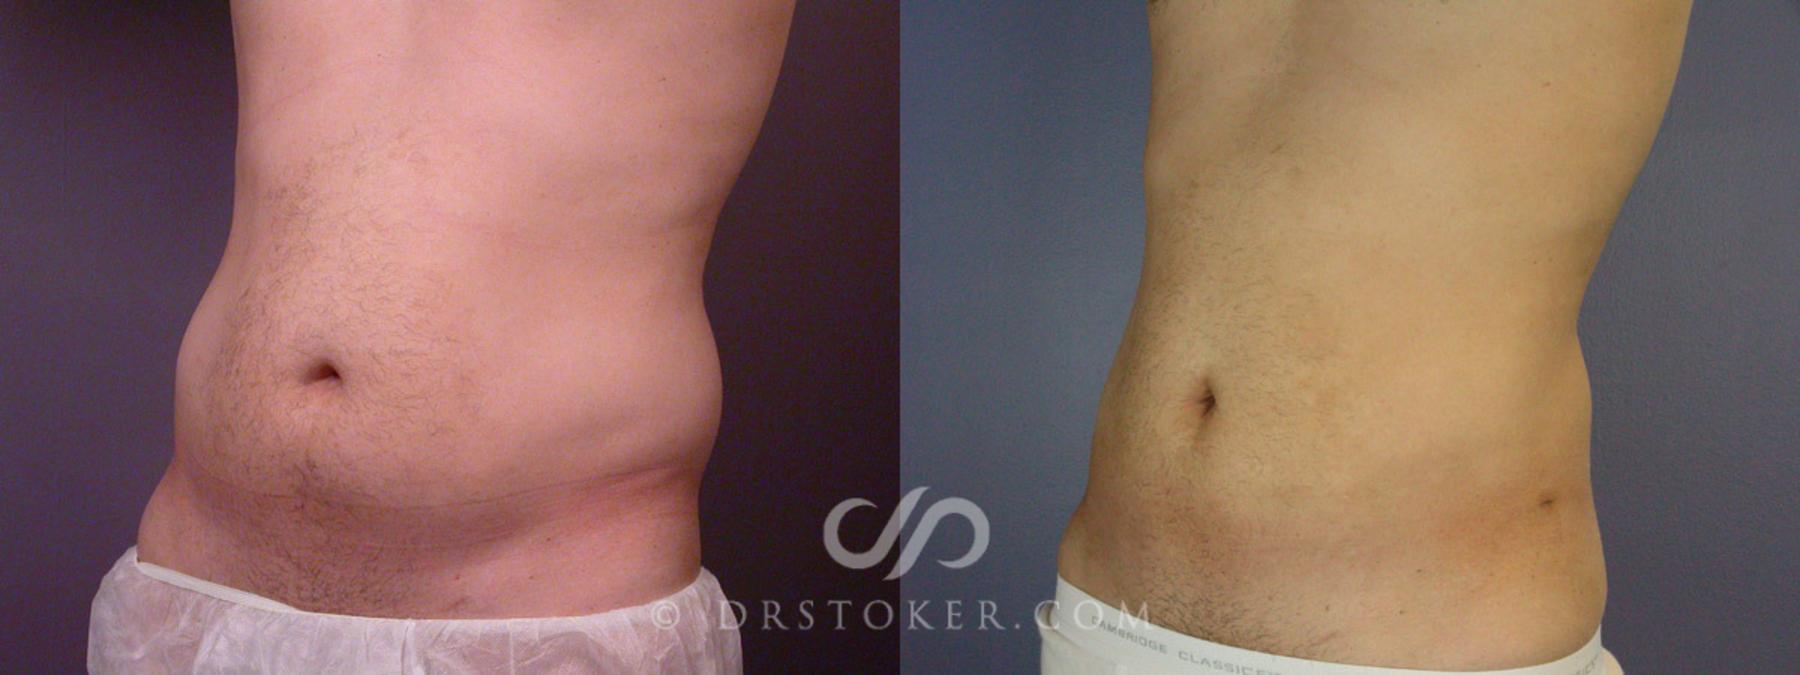 Liposuction for Men Before and After Photo Gallery, Los Angeles, CA